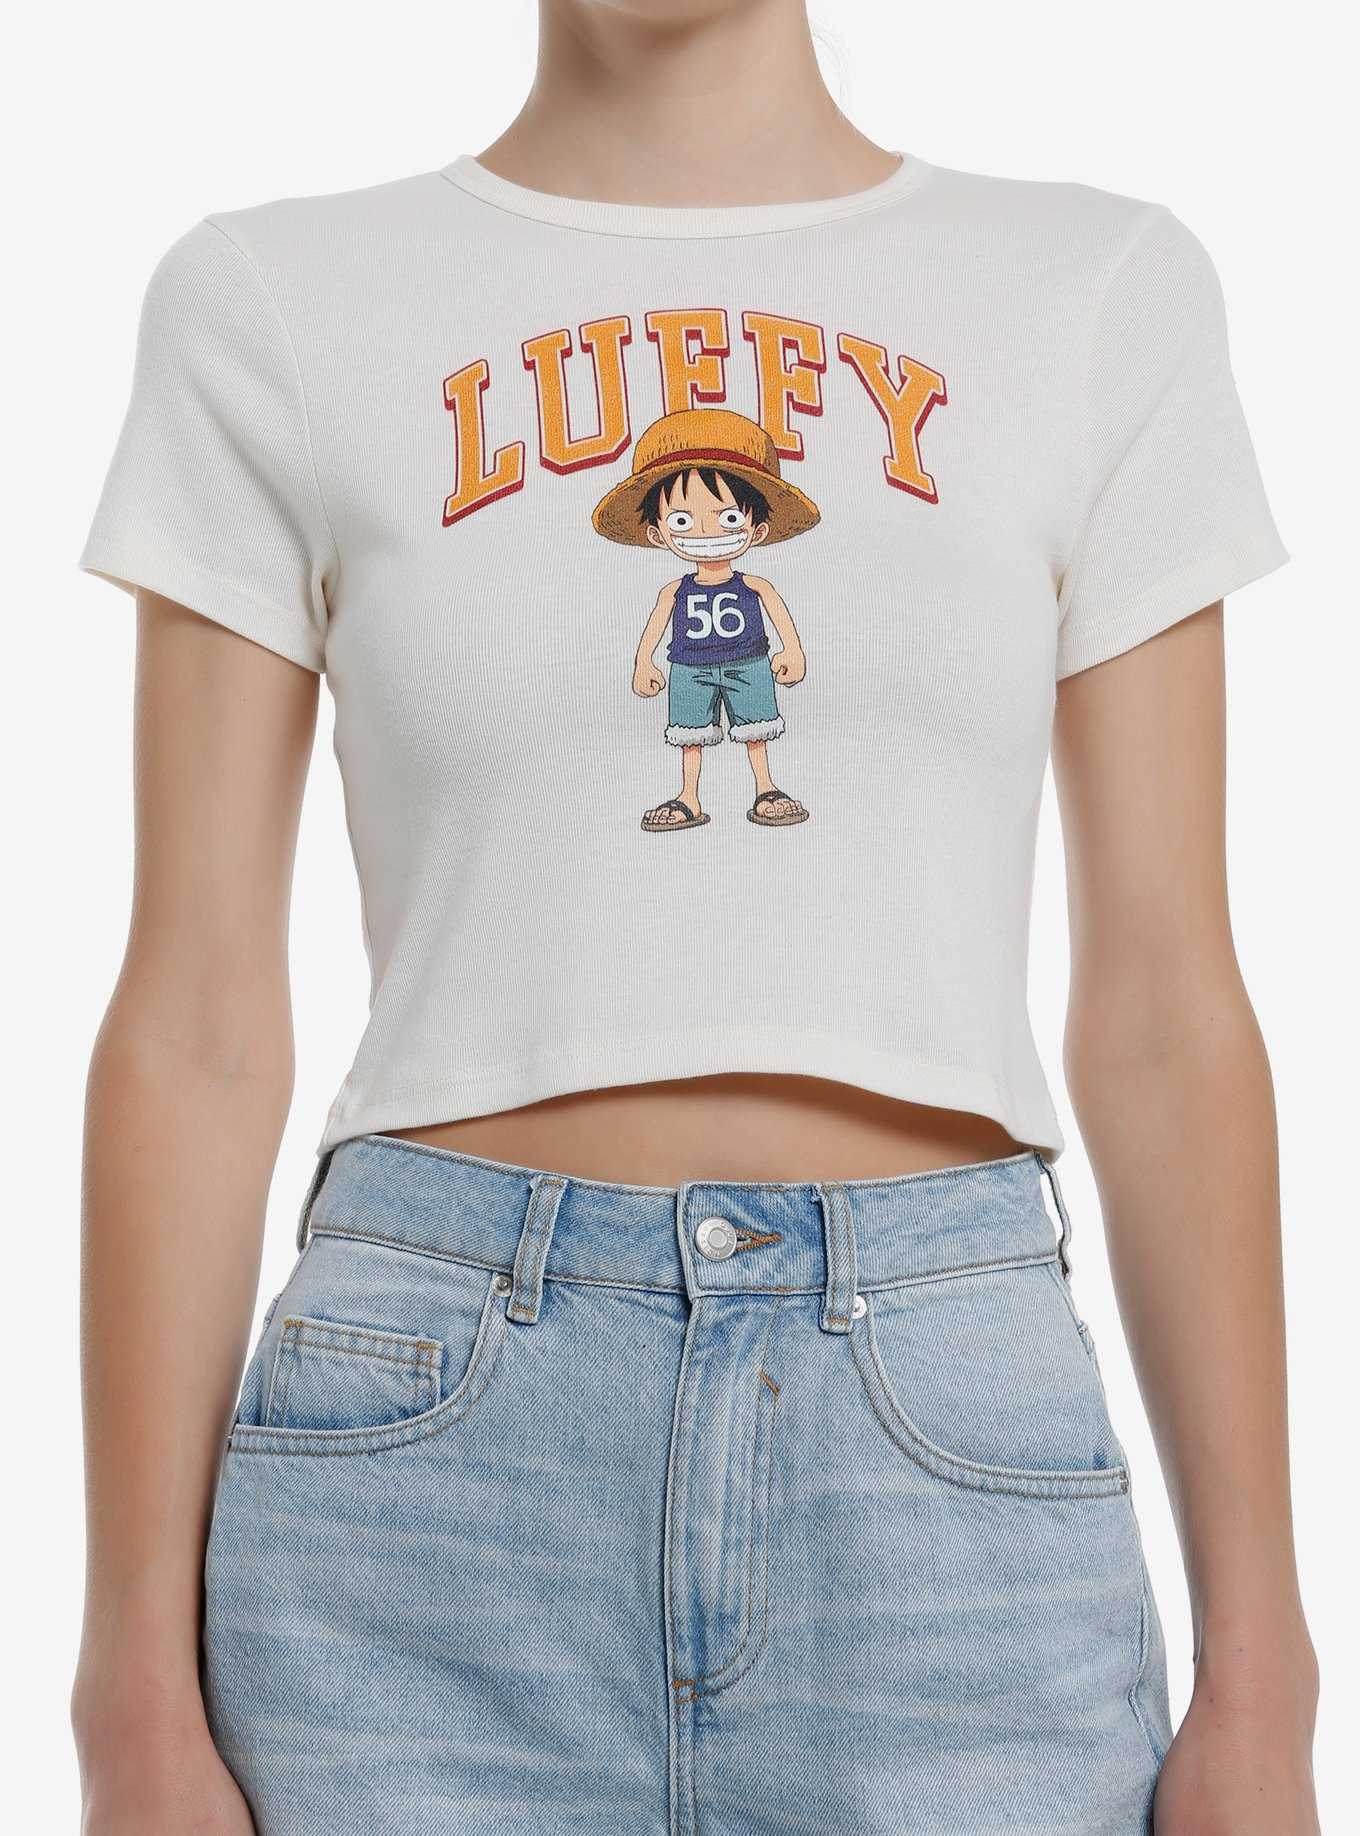 One Piece Young Luffy Varsity Girls Baby T-Shirt, , hi-res